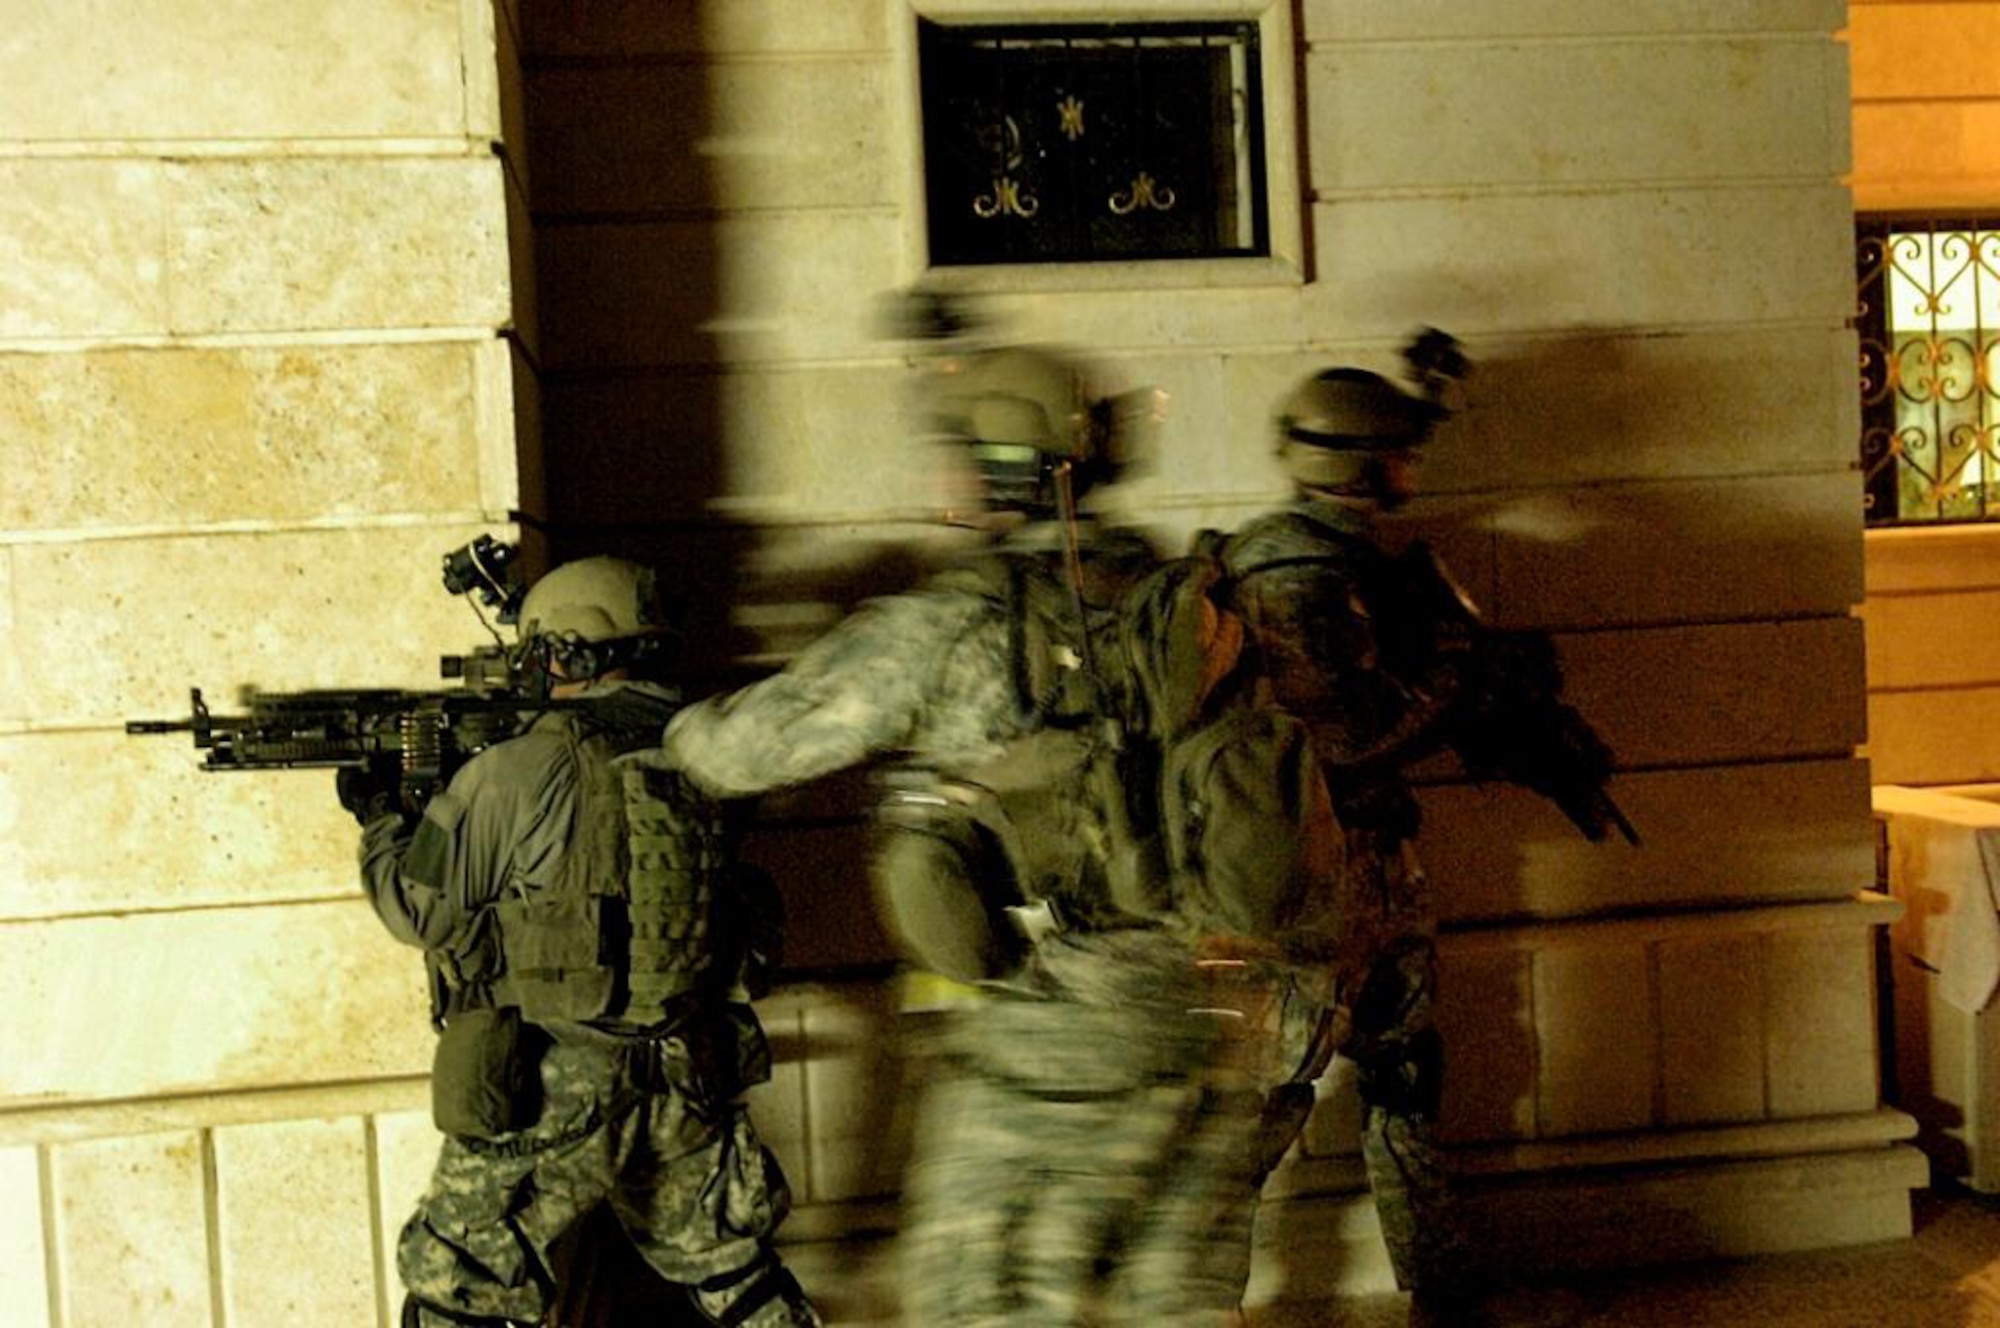 BAGHDAD, Iraq -- After receiving highly reliable information from the Fusion Cell and other intelligence sources, Coalition Forces prepare to launch an assault on a suspected terrorist occupied building. (file photo)